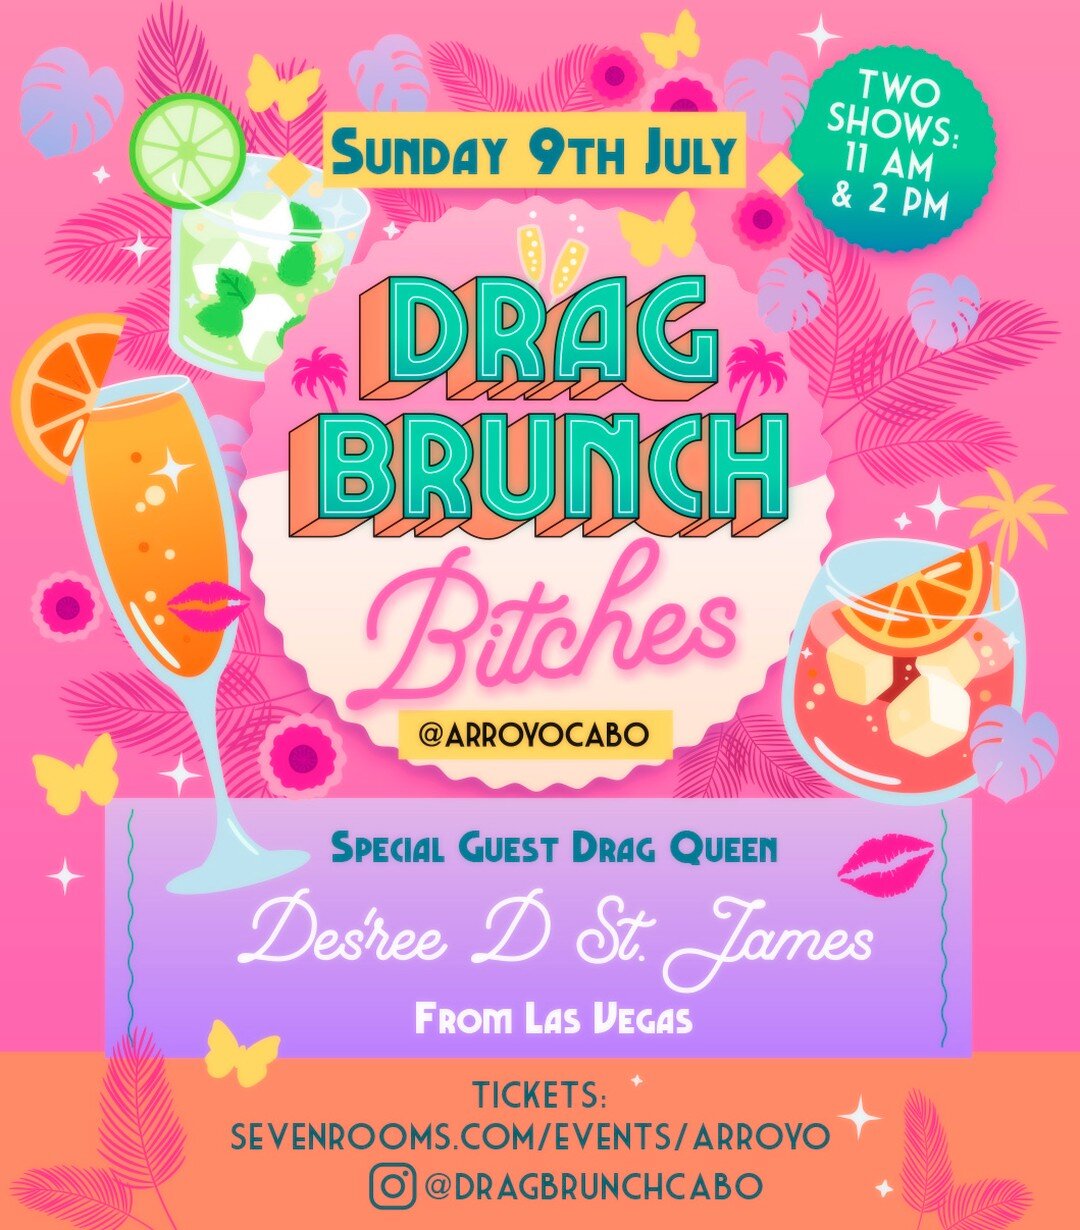 A few more days, Bitches! You won&rsquo;t want to miss our GRAND OPENING.
From Vegas to Cabo&hellip; @desreestjames will be performing LIVE this coming Sunday 9th at @dragbrunchcabo at @arroyocabo 💋

Follow the link in our bio to get your tickets to